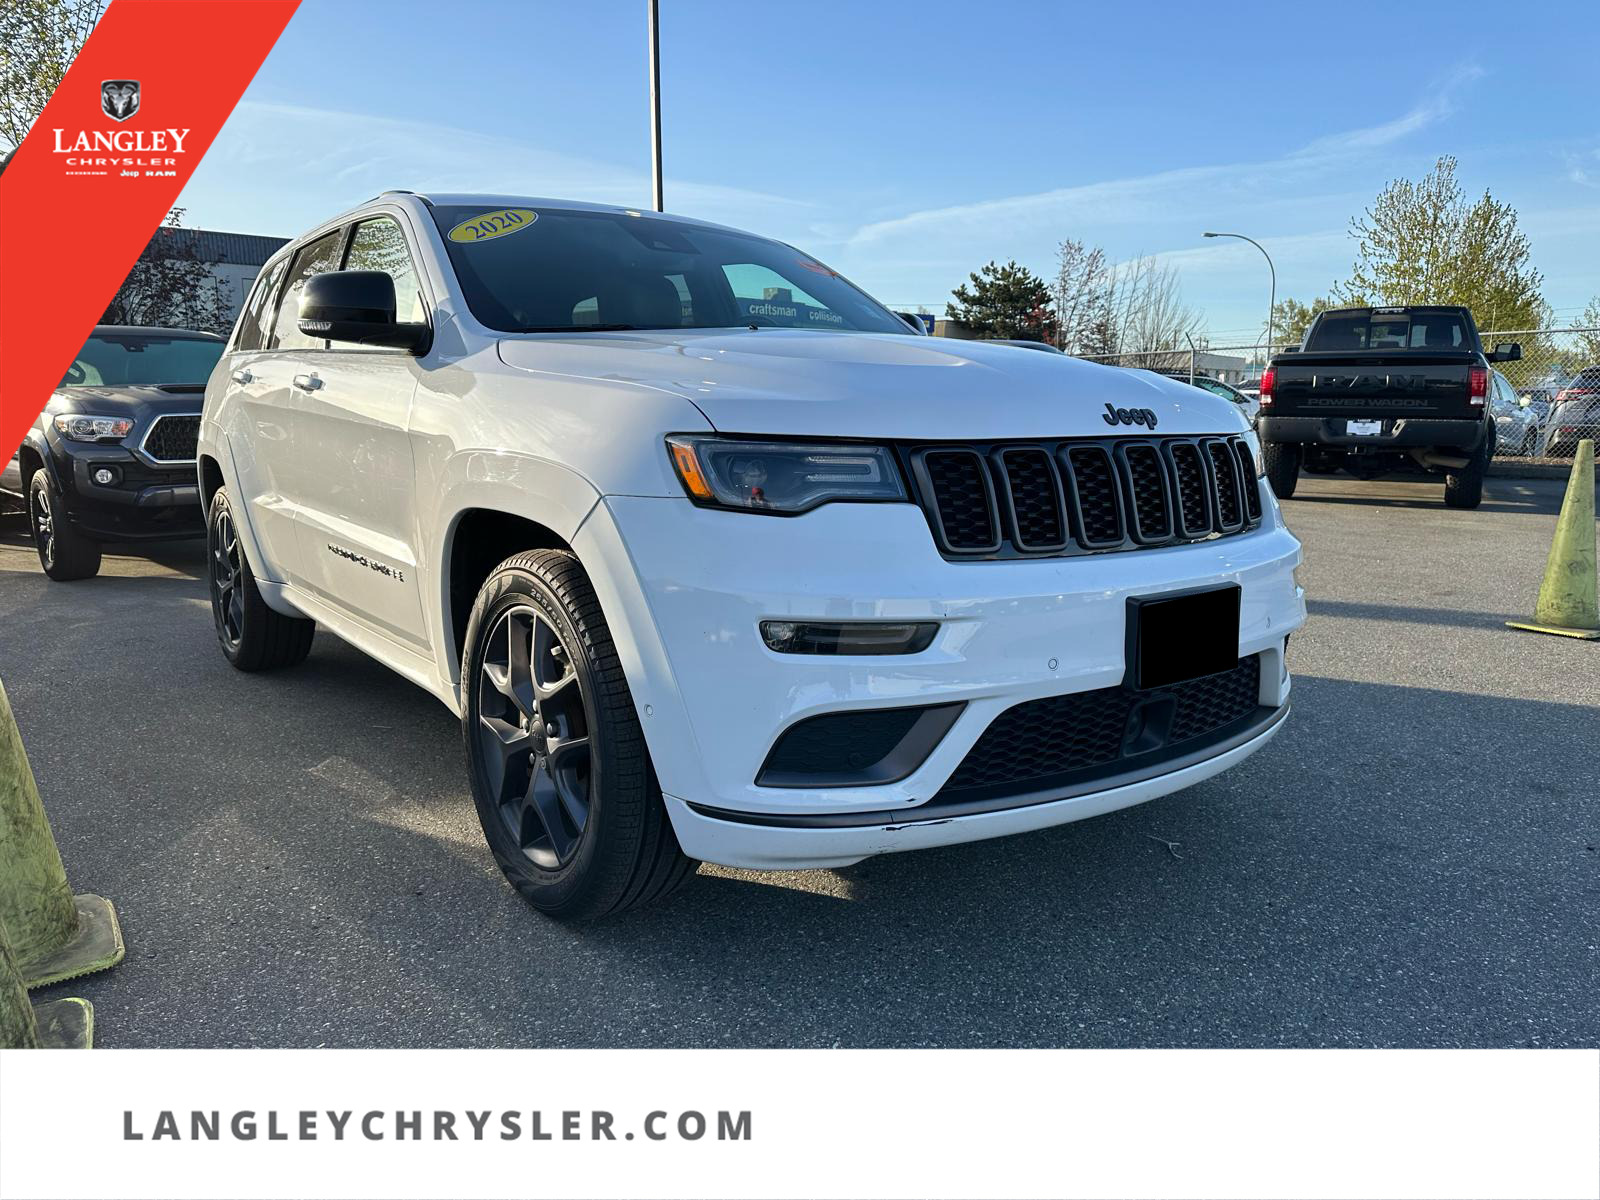 2020 Jeep Grand Cherokee Limited Pano Sunroof |Leather | Trailer Tow | Spor